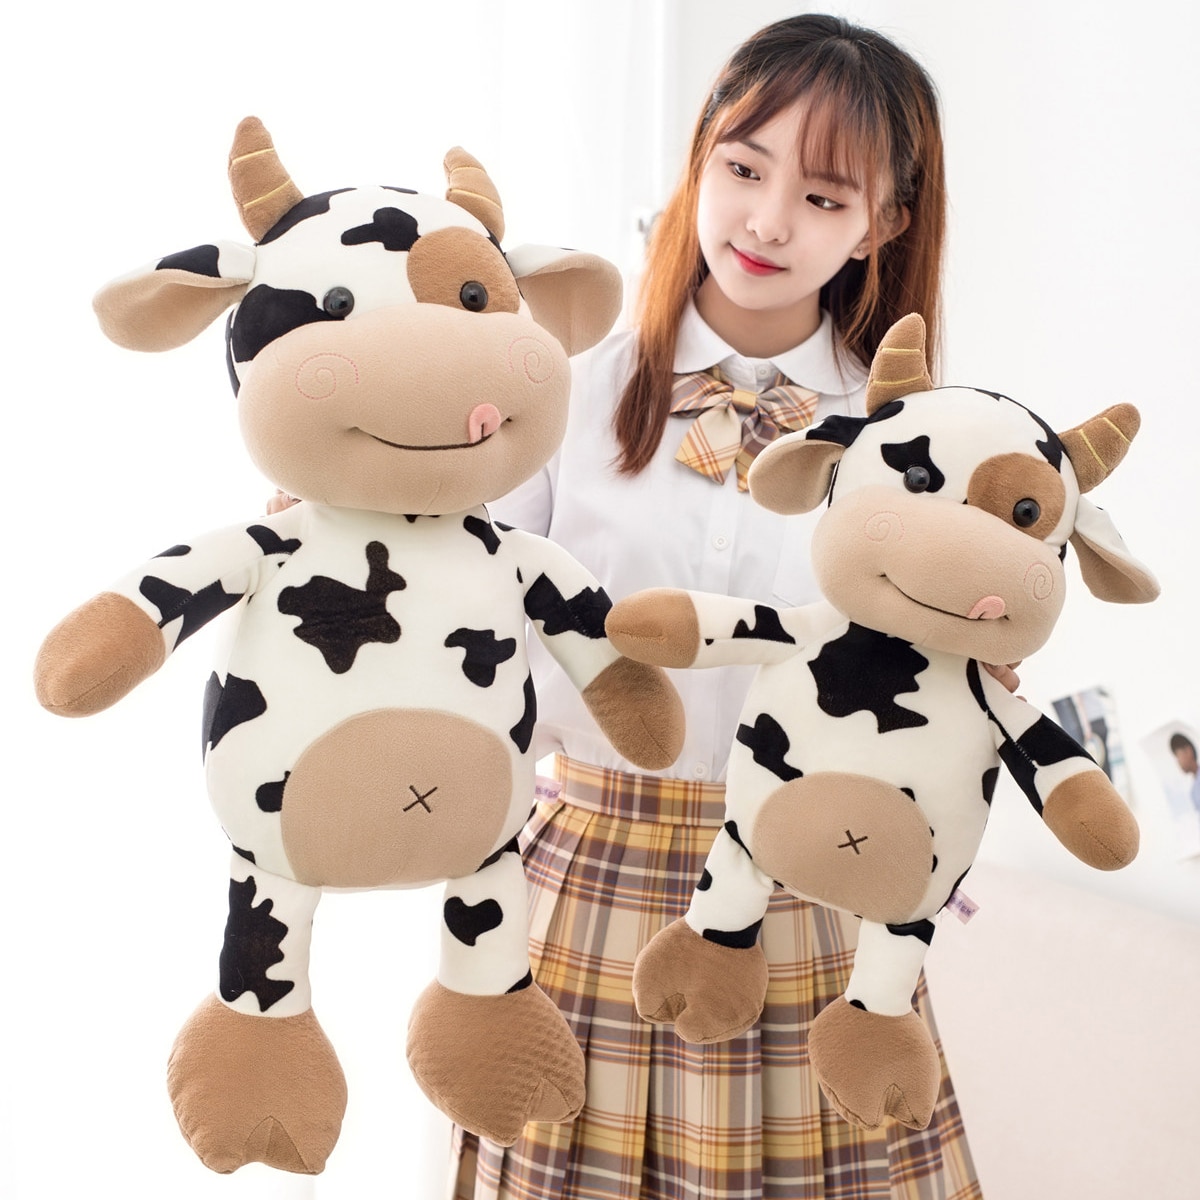 2020 New Plush Cow Toy Cute Cattle Plush Stuffed Animals Cattle Soft Doll Kids Toys Birthday - The Cow Print